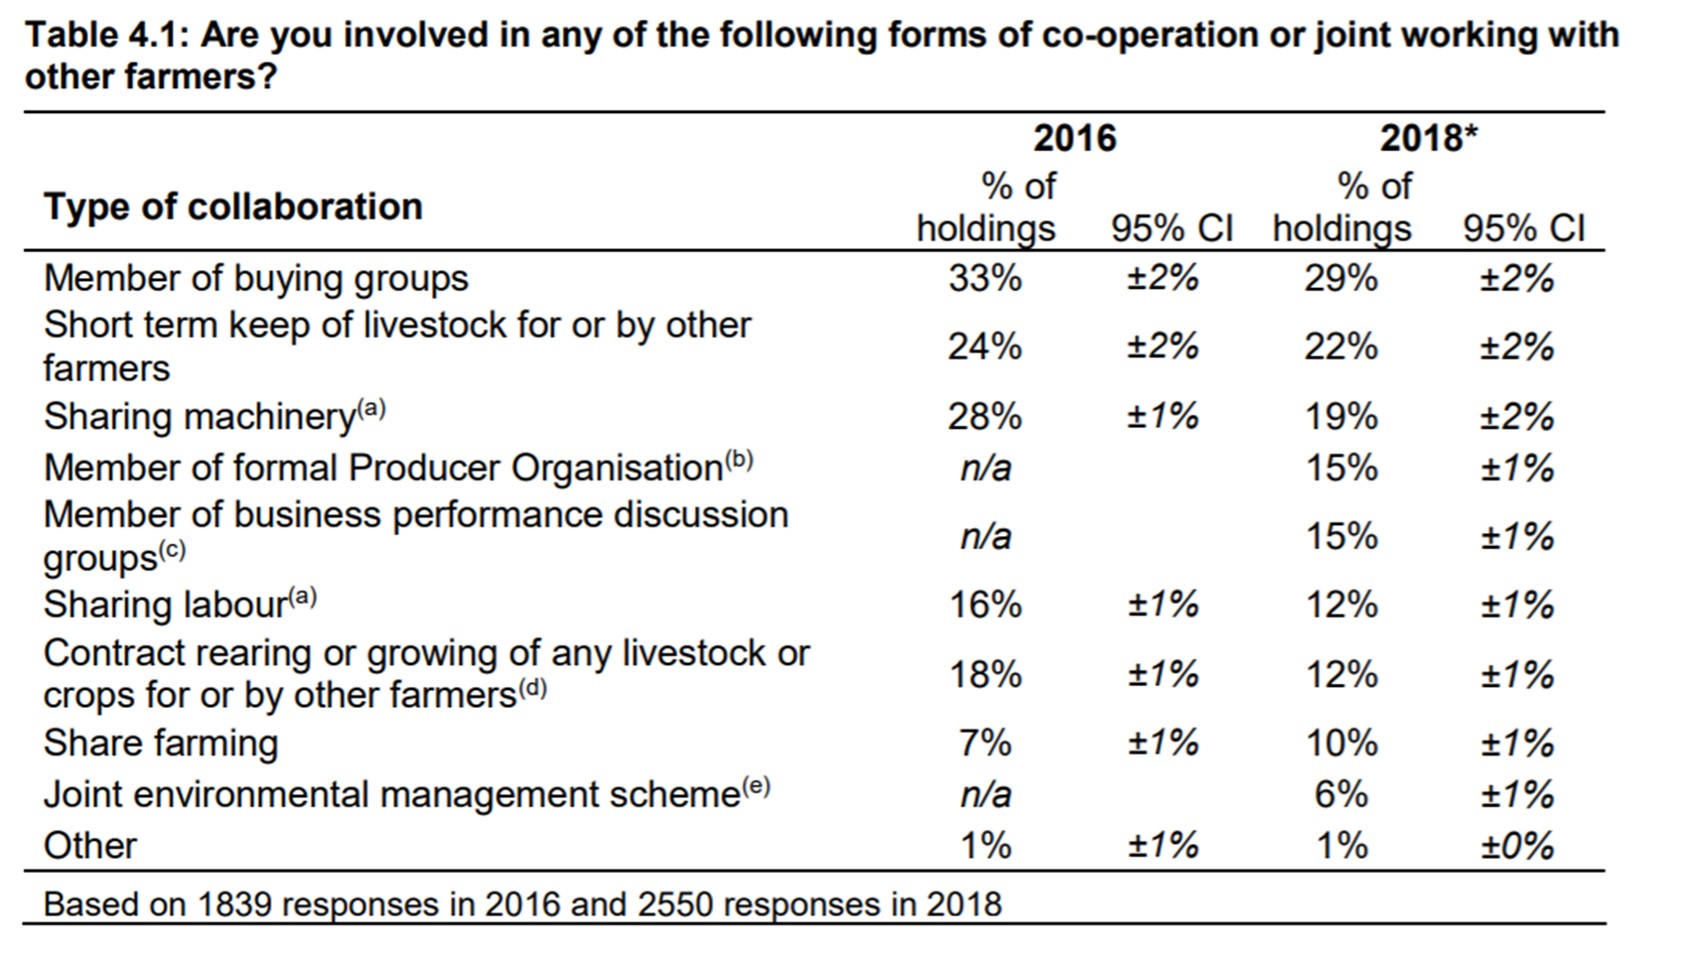 In 2018, the most common type of collaborative practice selected by farmers was membership of buying groups (29 percent)